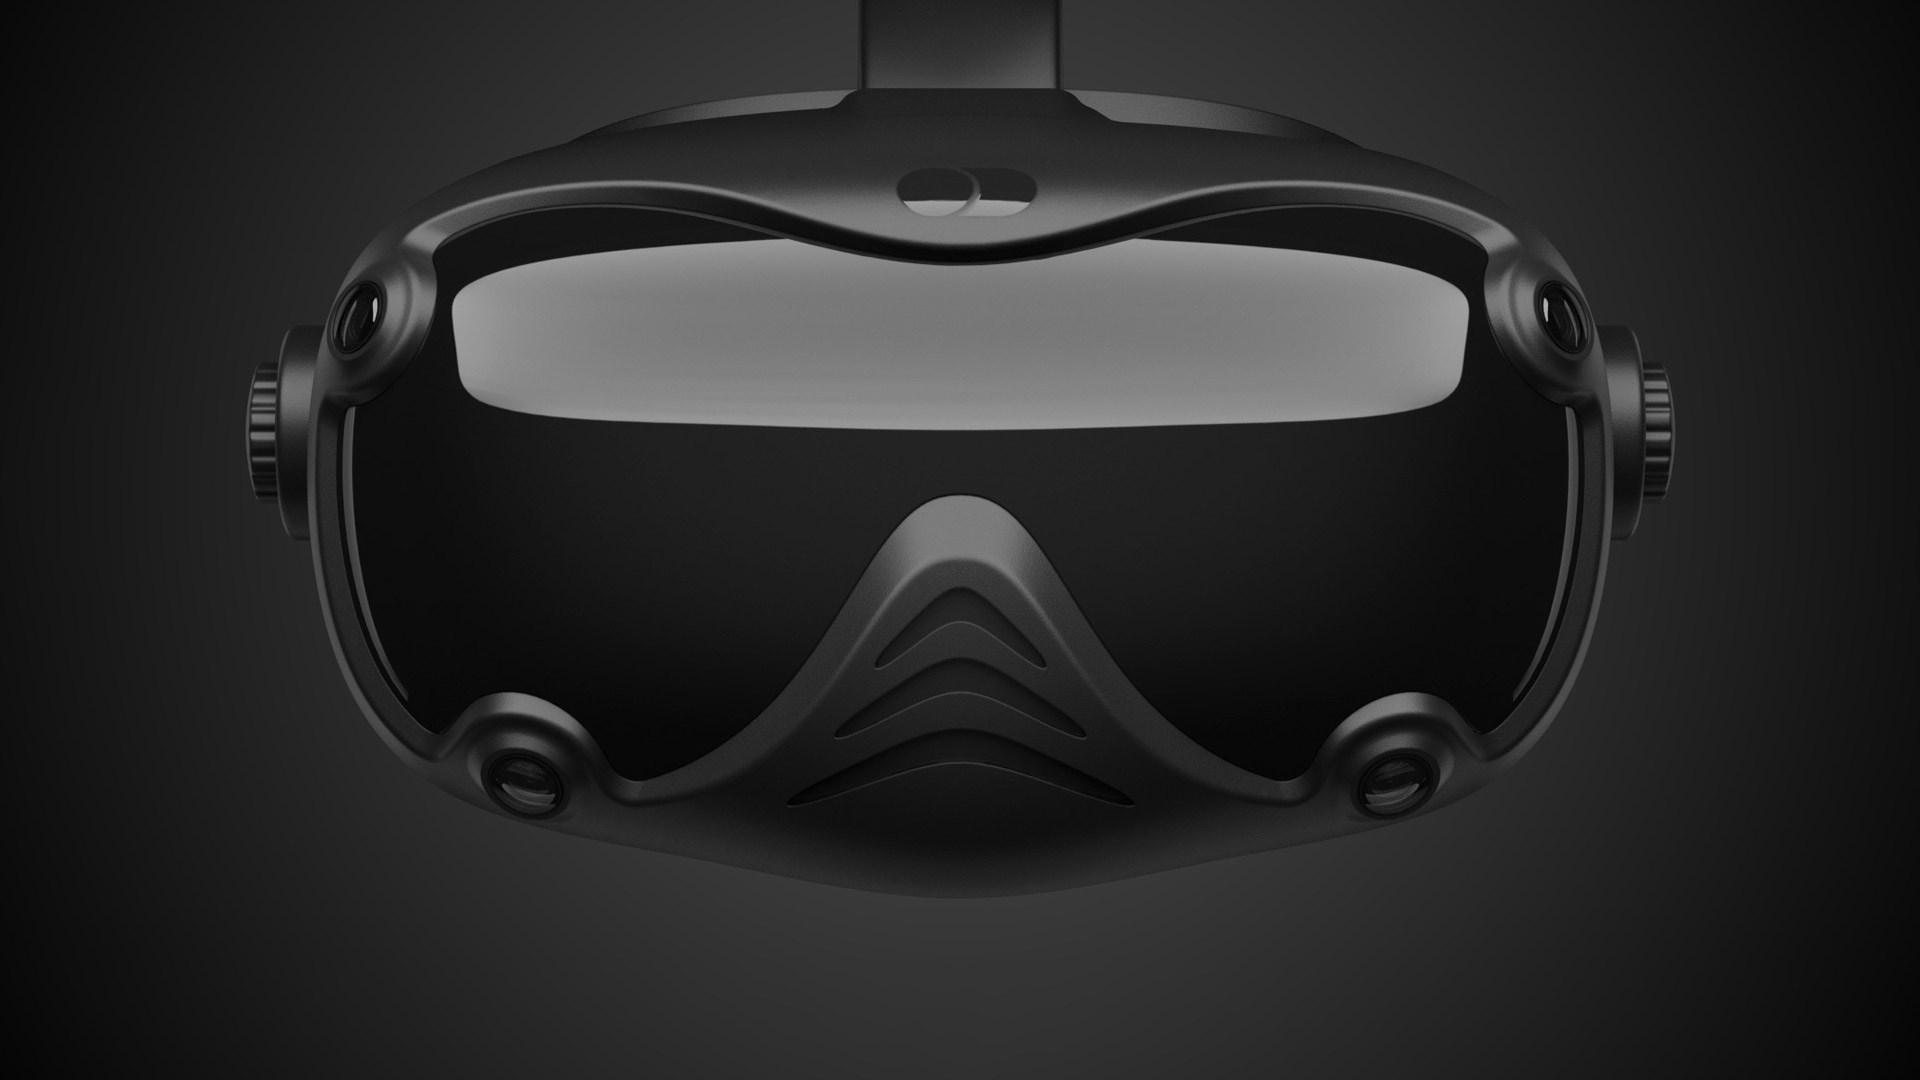 The XR Week Peek (2020.10.26): DecaGear is an intriguing VR headset, HTC is working on a new device, and more!